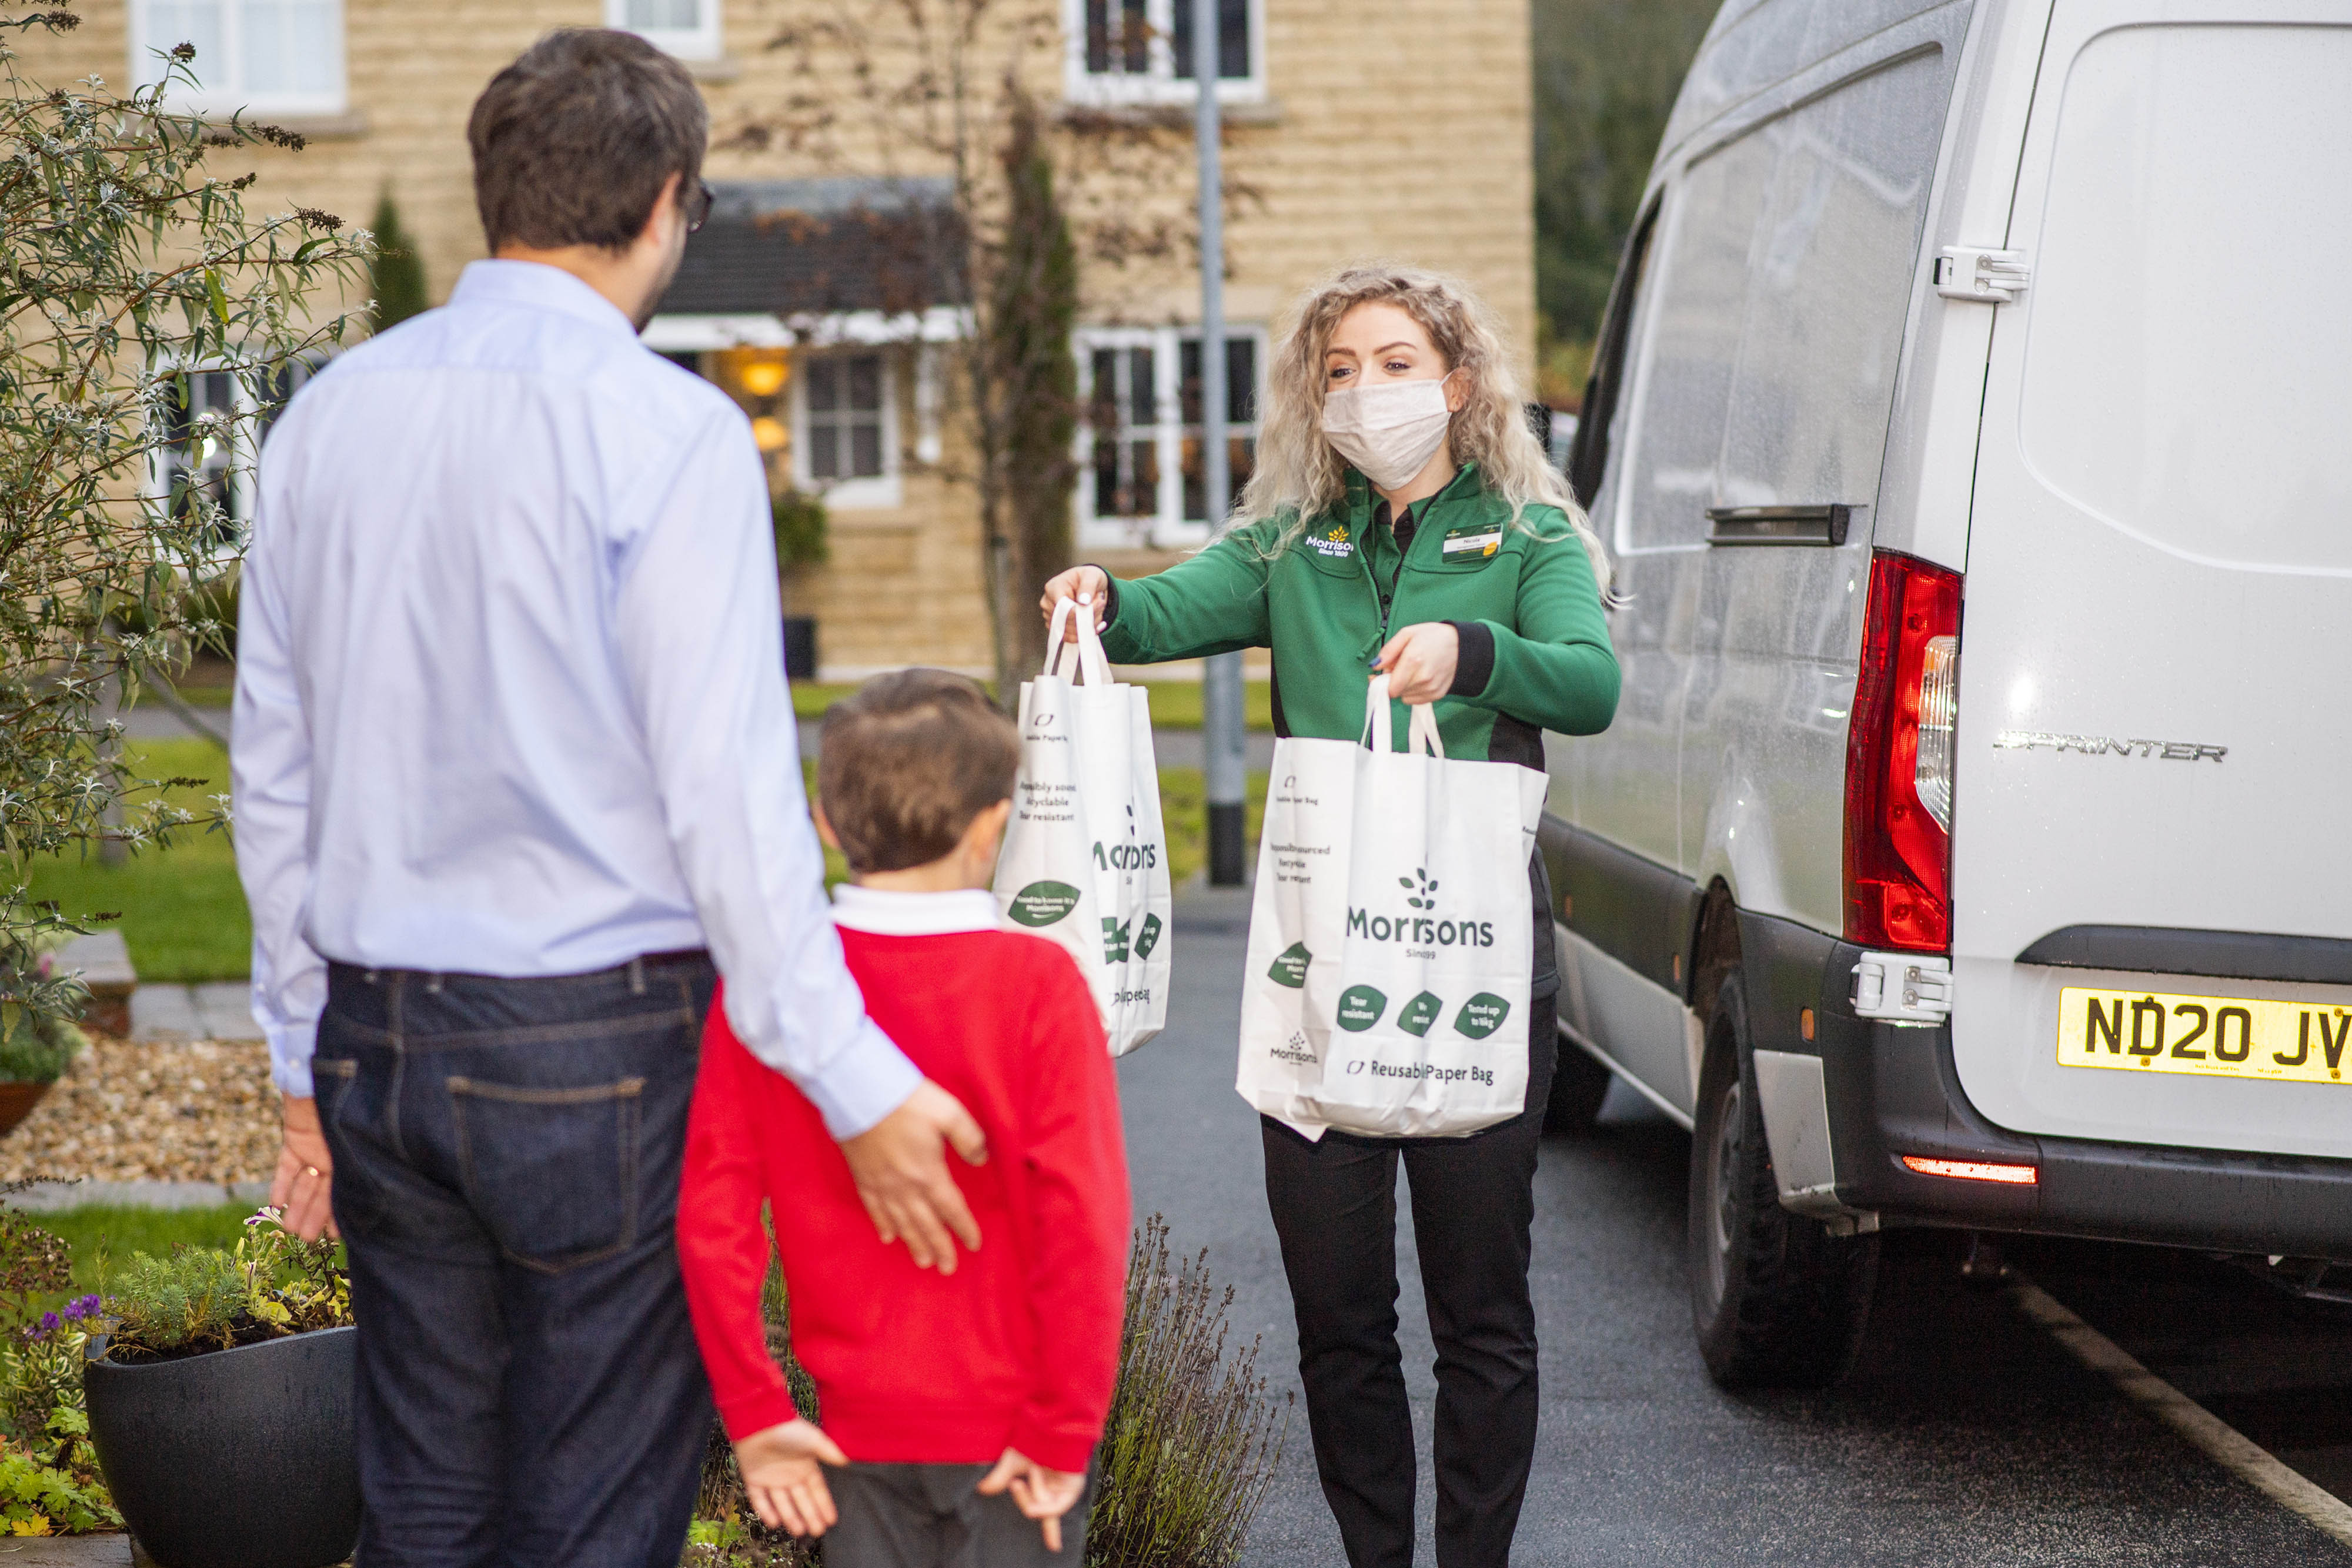 Morrisons to introduce service to feed self-isolating schoolkids